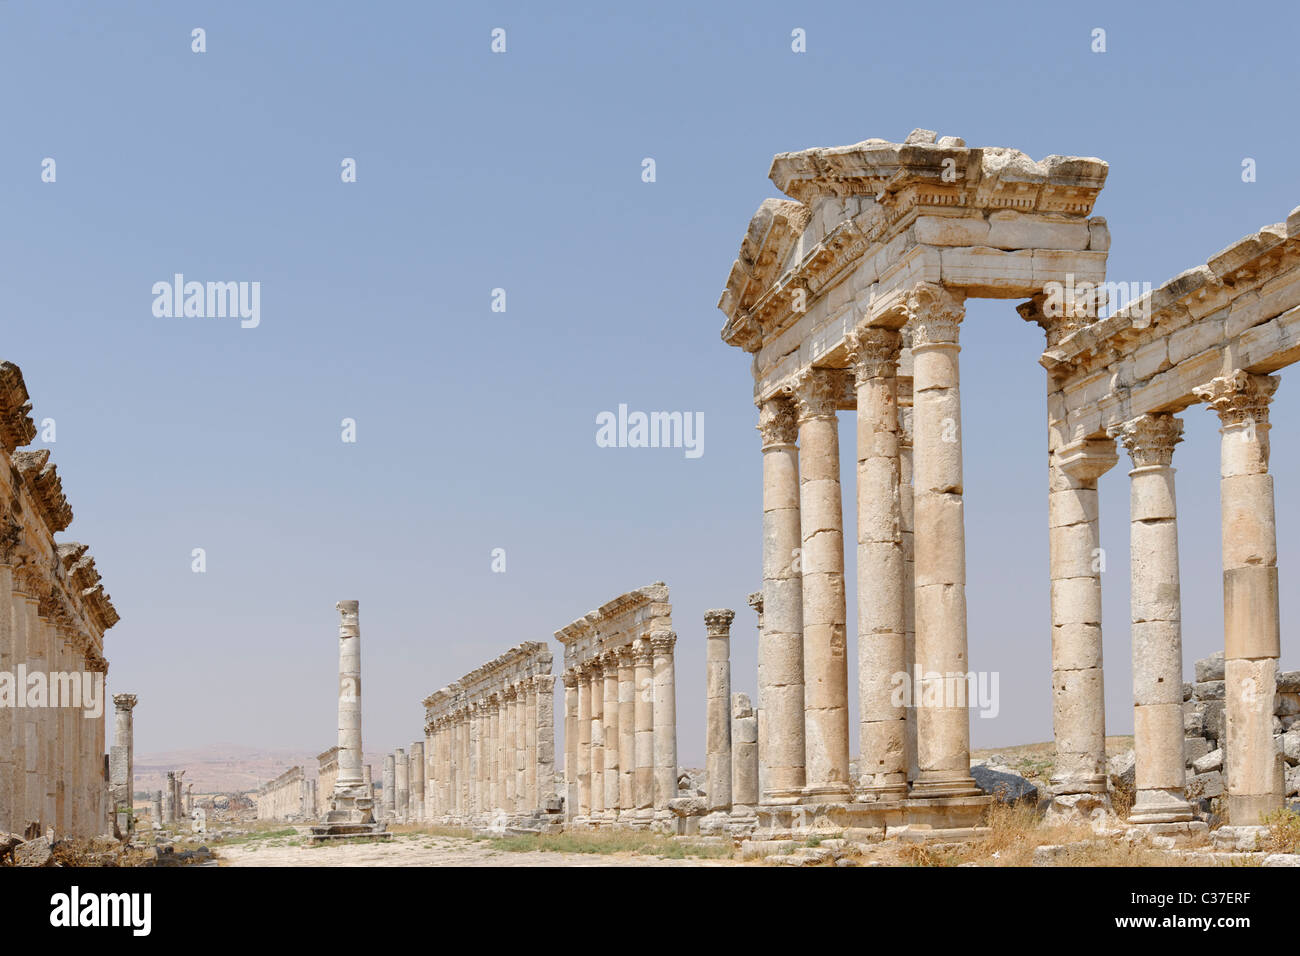 The majestic Colonnaded Street of the ancient city of Apamea Syria Stock Photo